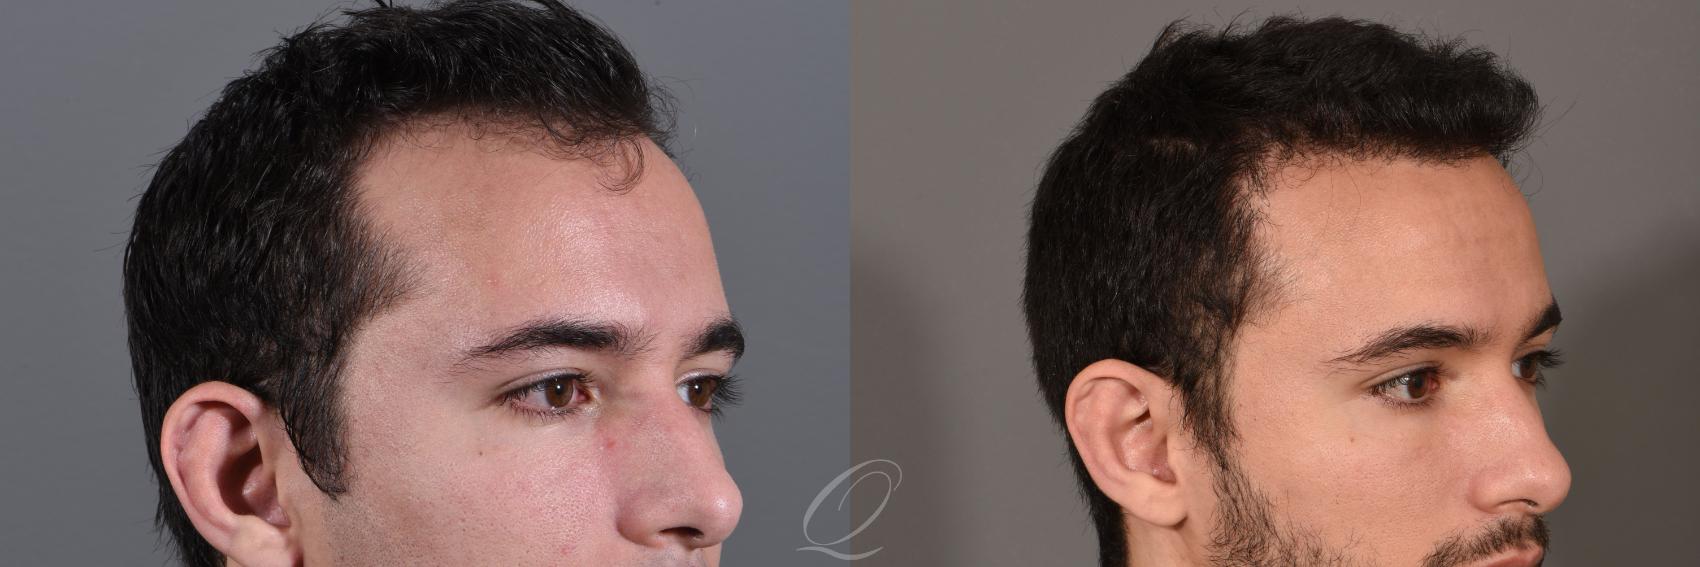 FUT Case 1519 Before & After View #3 | Rochester, Buffalo, & Syracuse, NY | Quatela Center for Hair Restoration